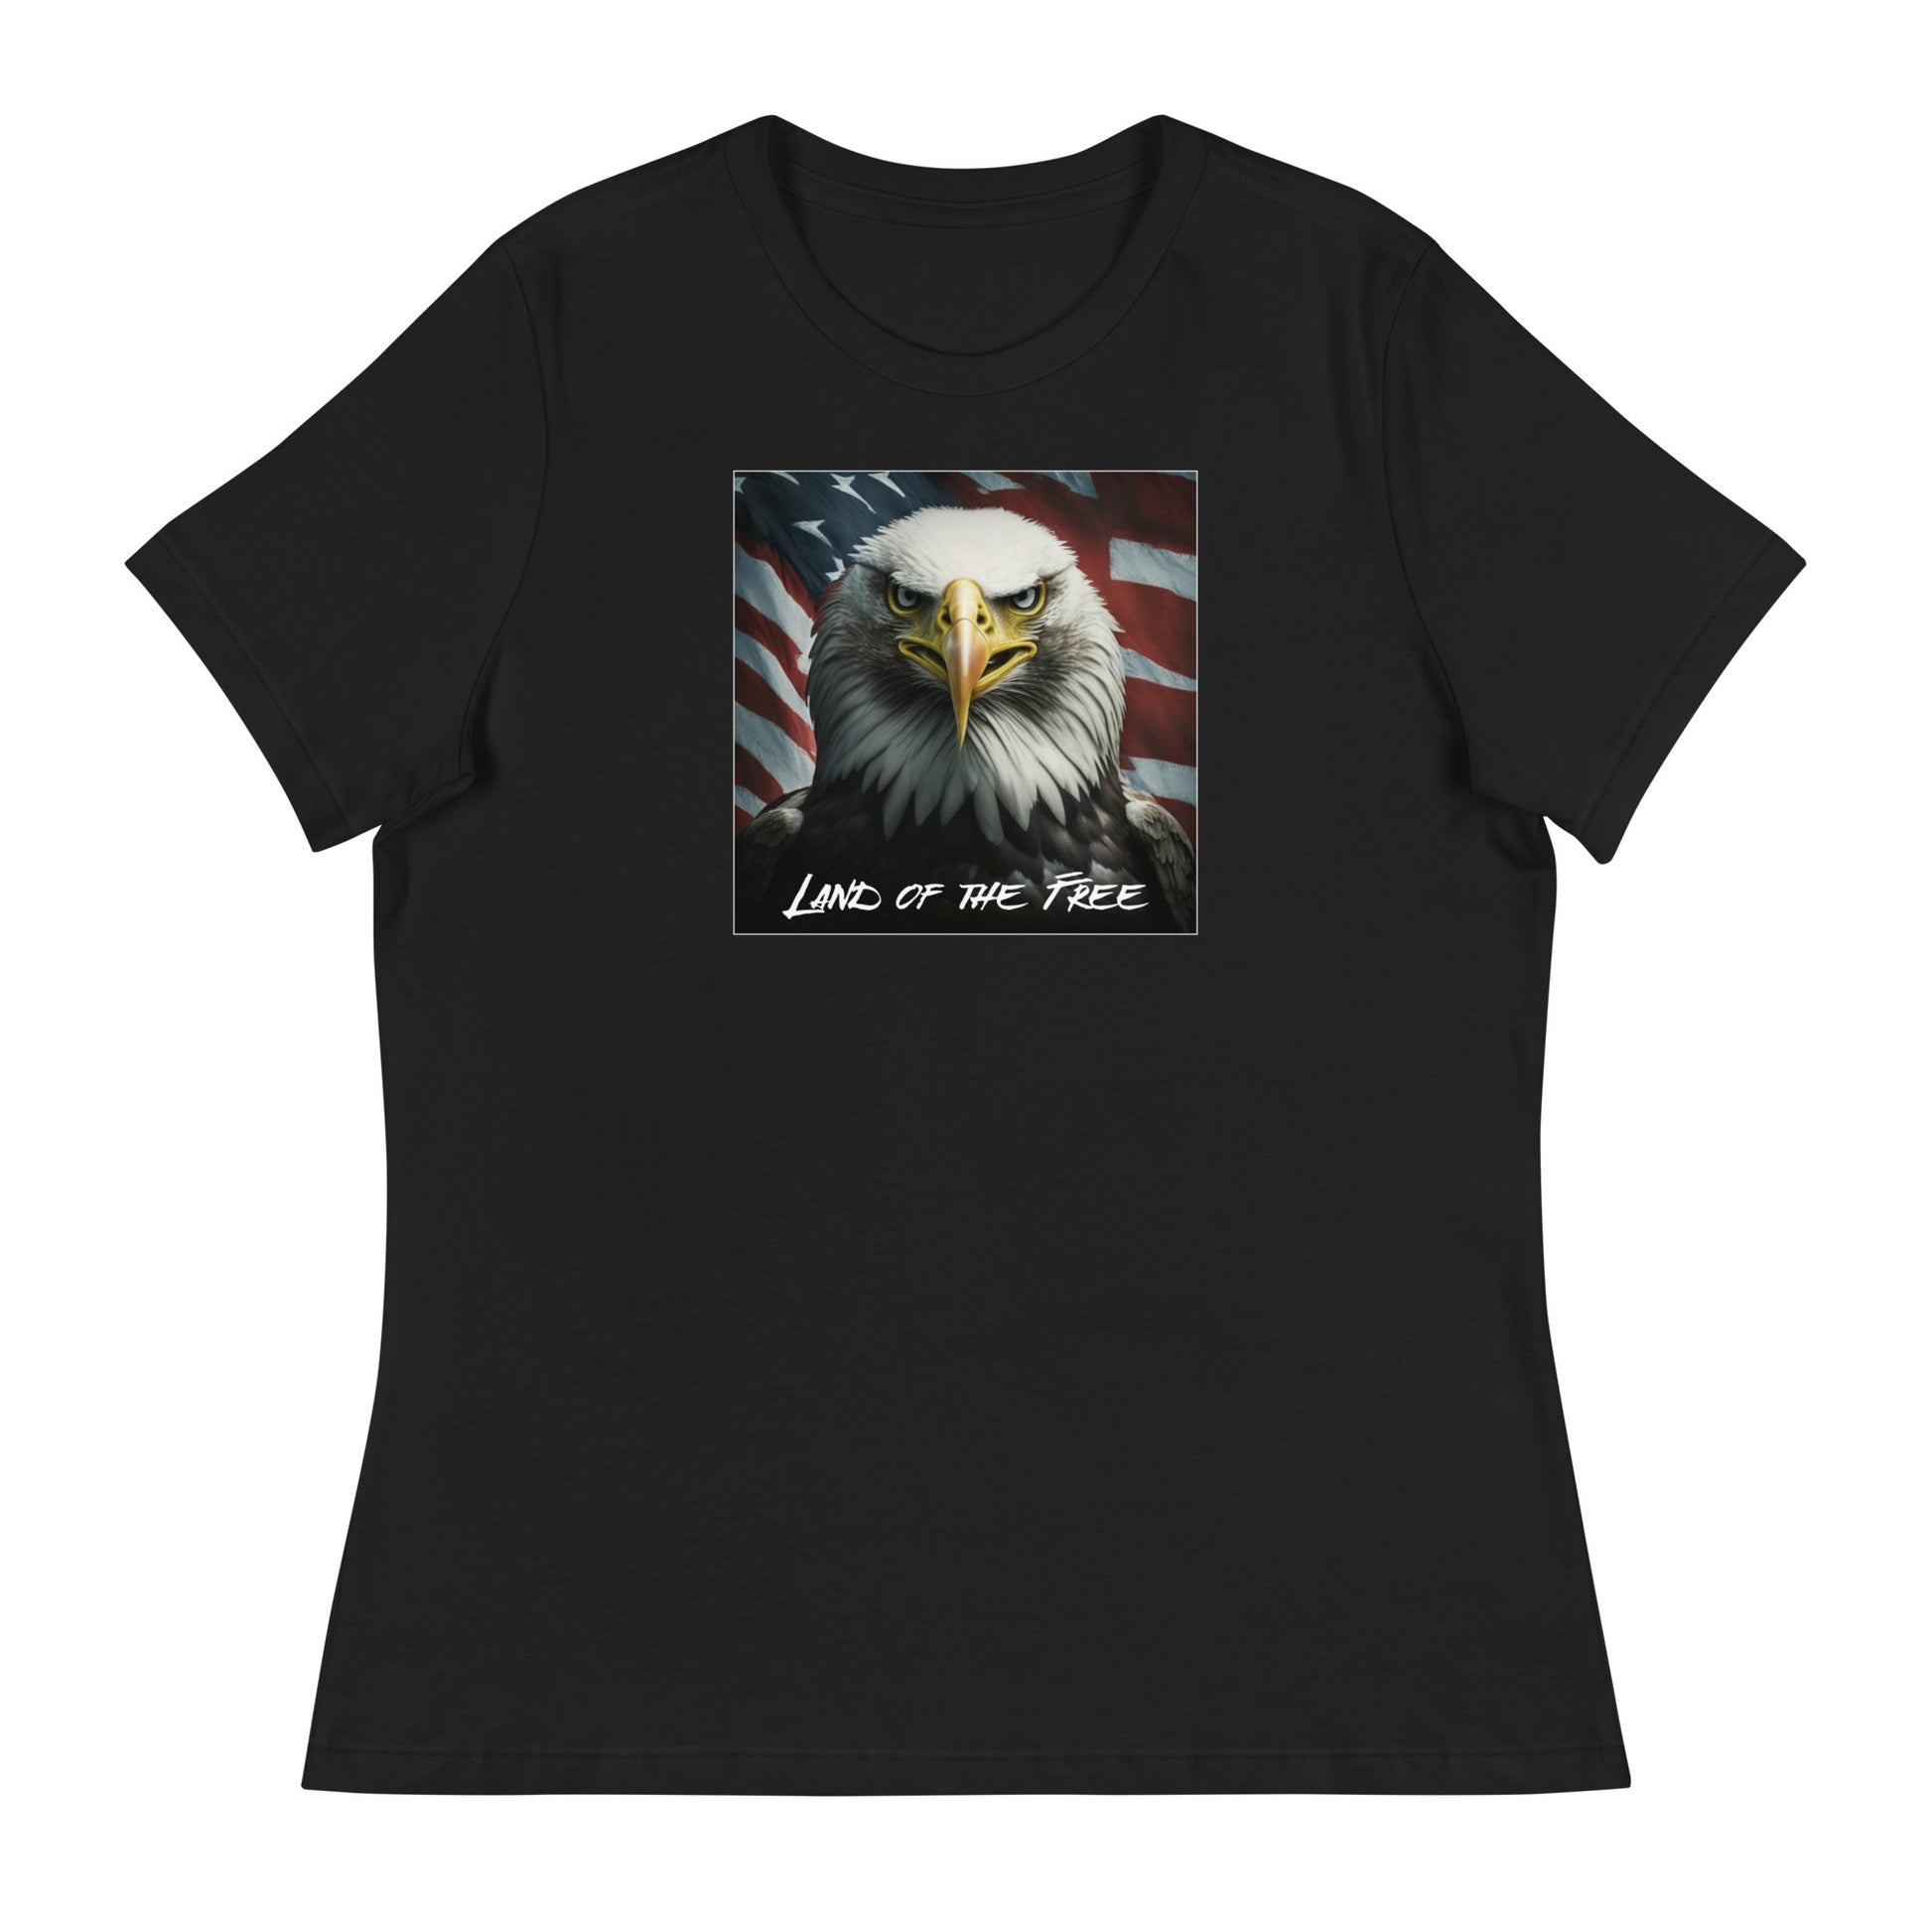 Land of the Free Graphic Women's T-Shirt Black